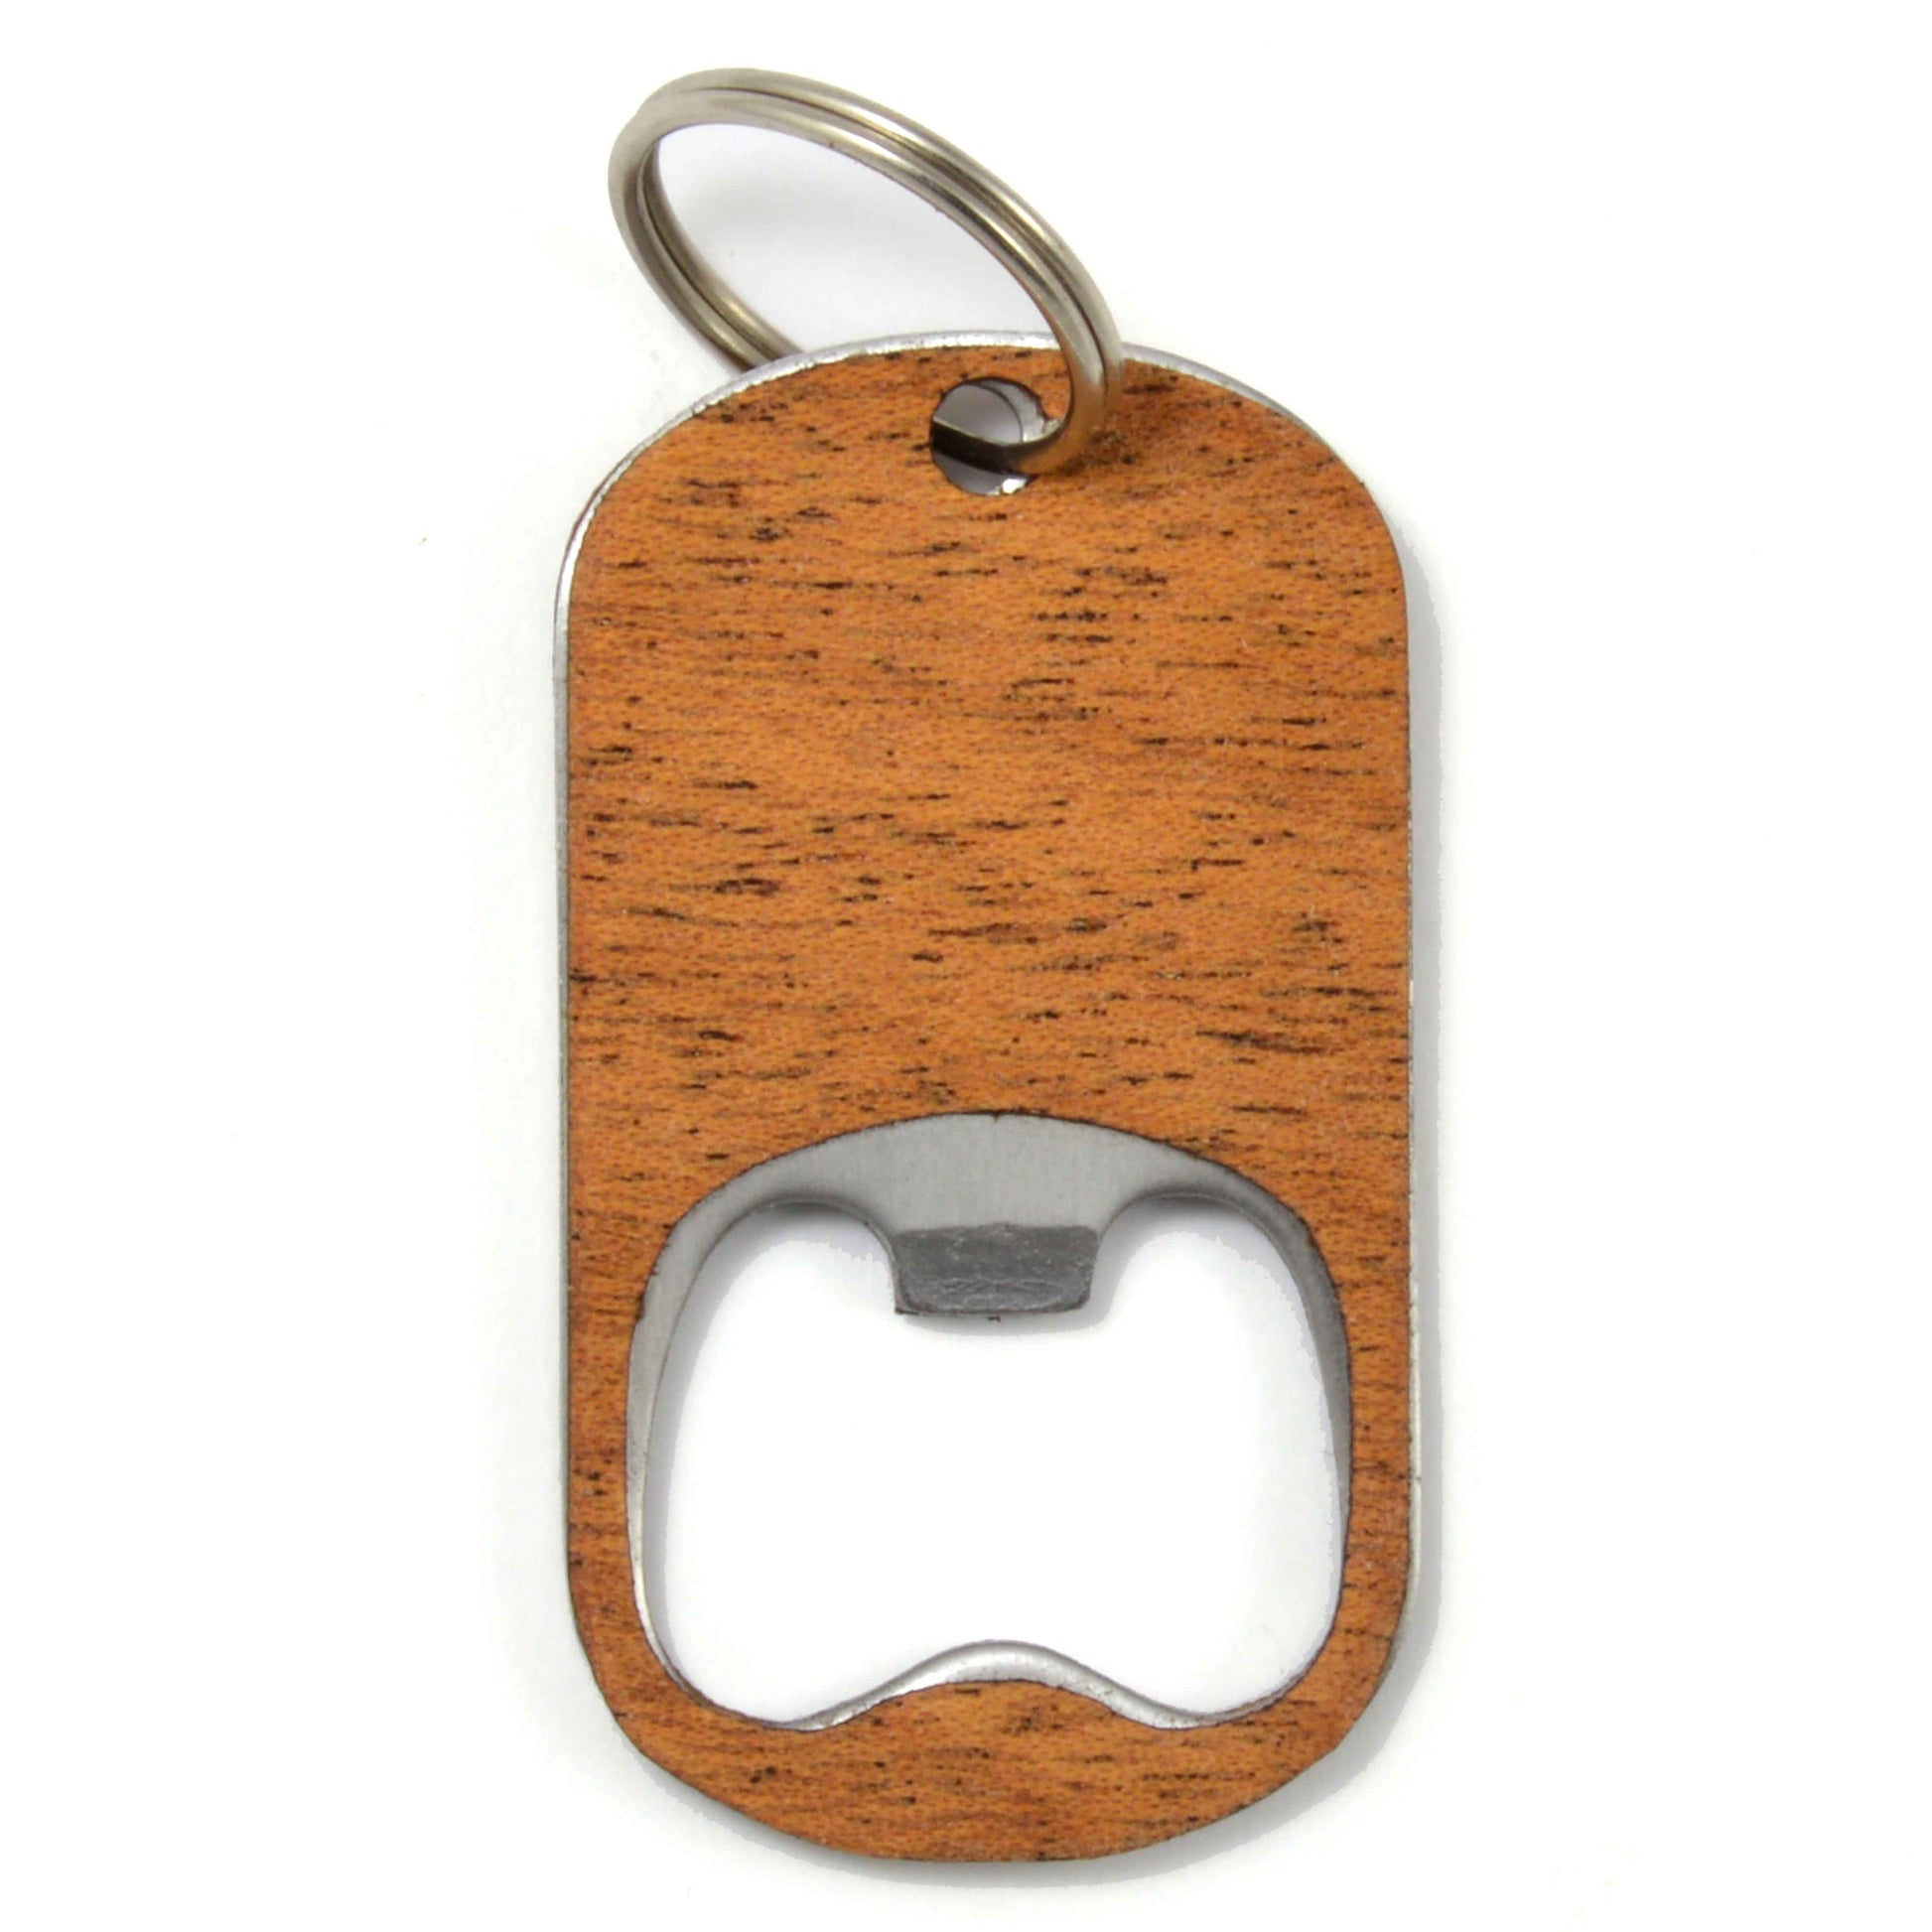 Bottle opener wooden key ring to personalize